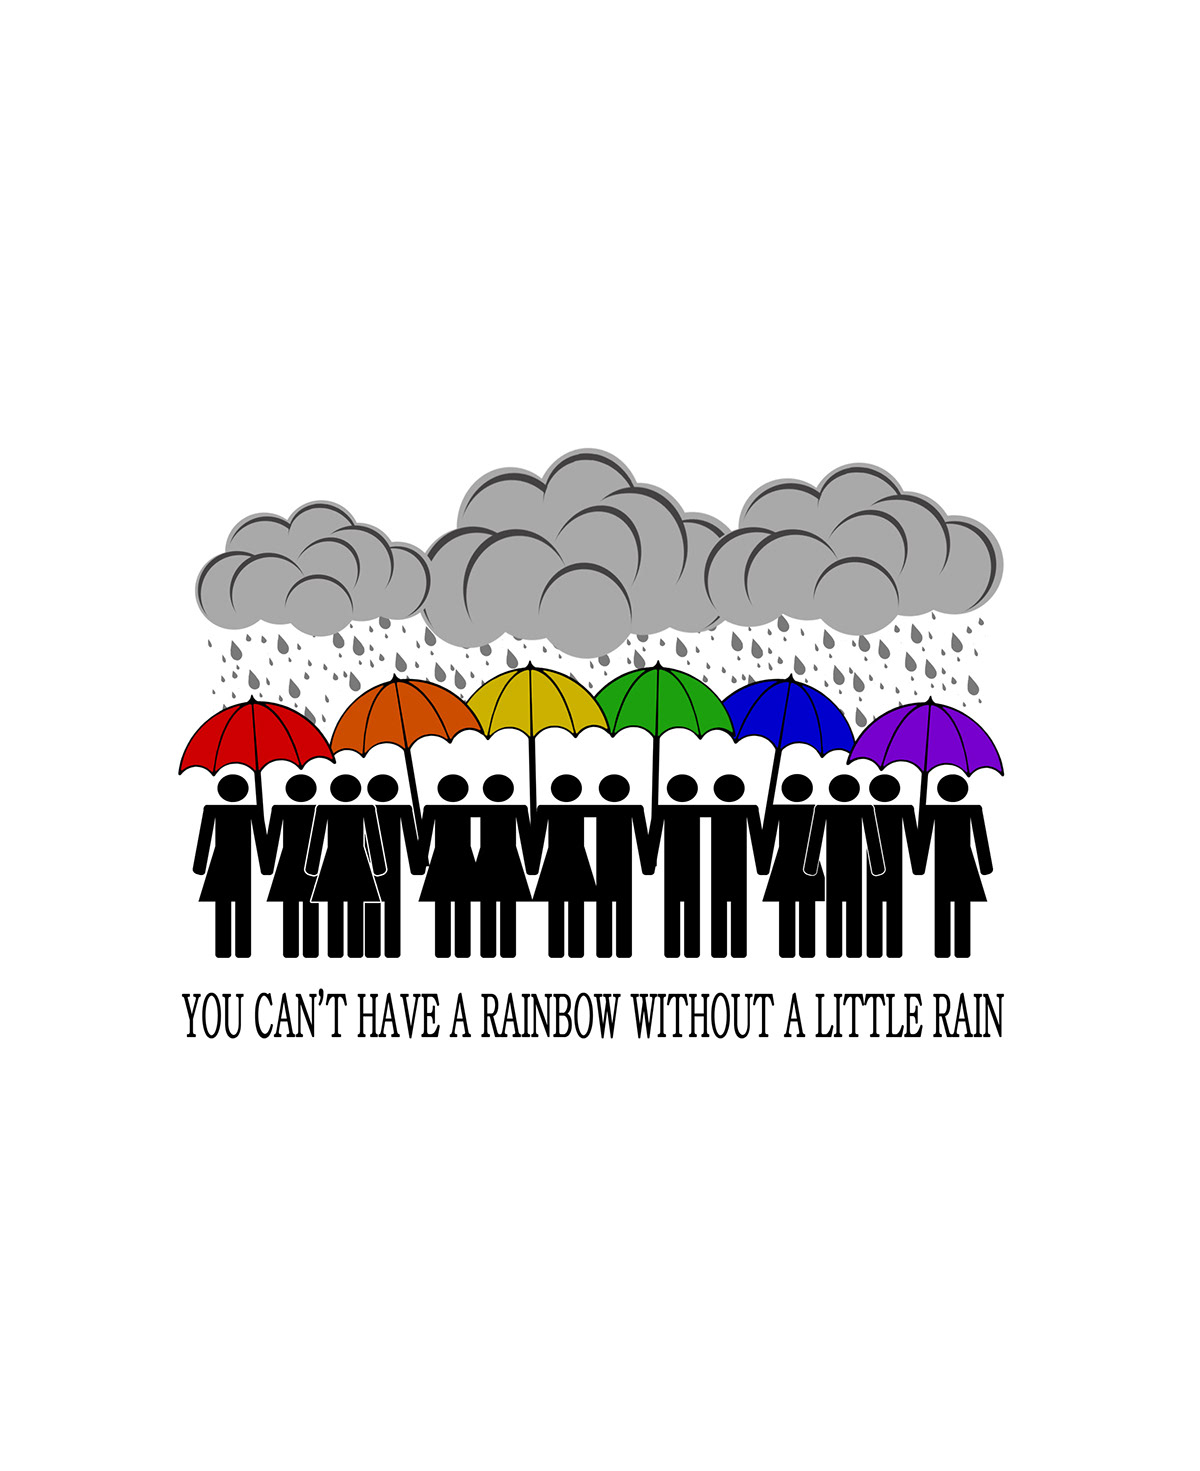 rain storm inspiration LGBT GLBT gay homosexual HOMOSEXUALITY queer rainbow pride doma equality marriage legalize